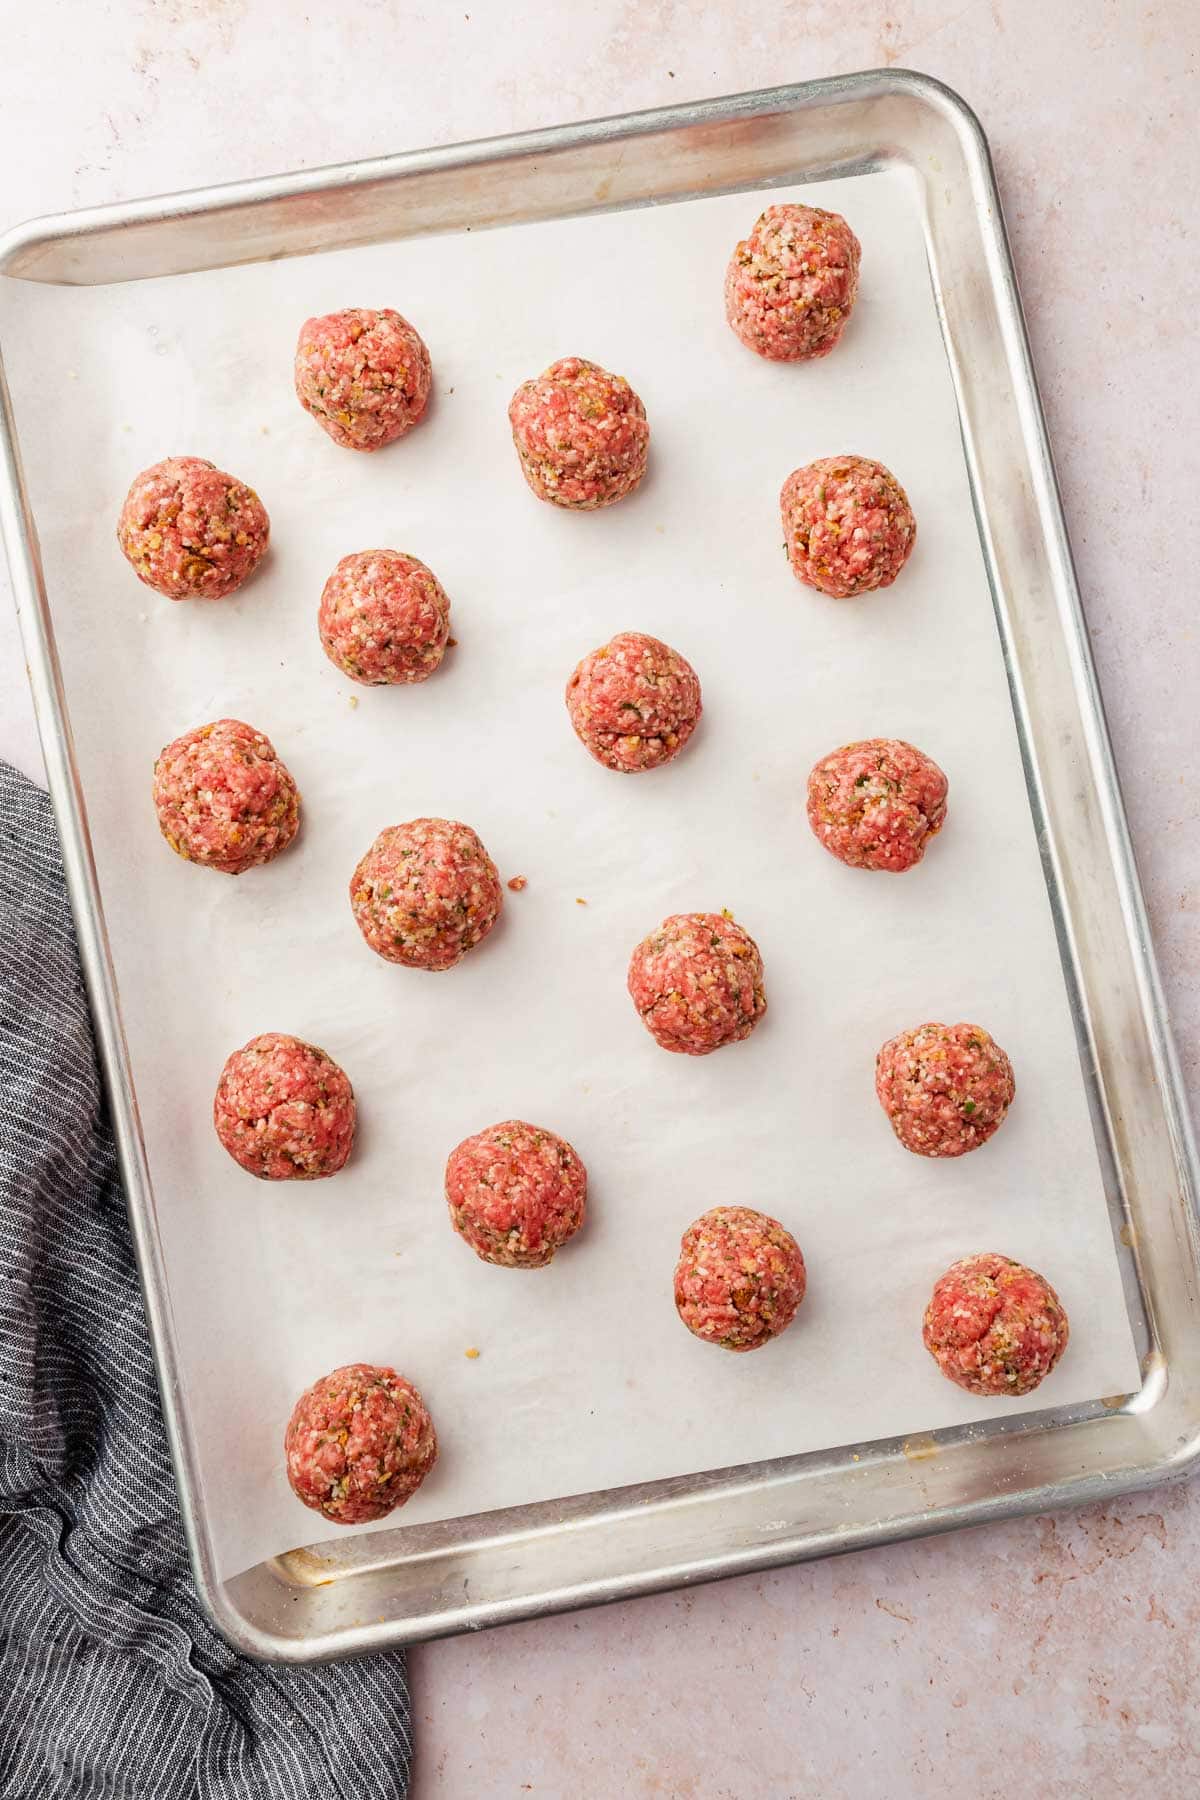 An overhead view of a parchment lined baking sheet with raw gluten free meatballs in rows.